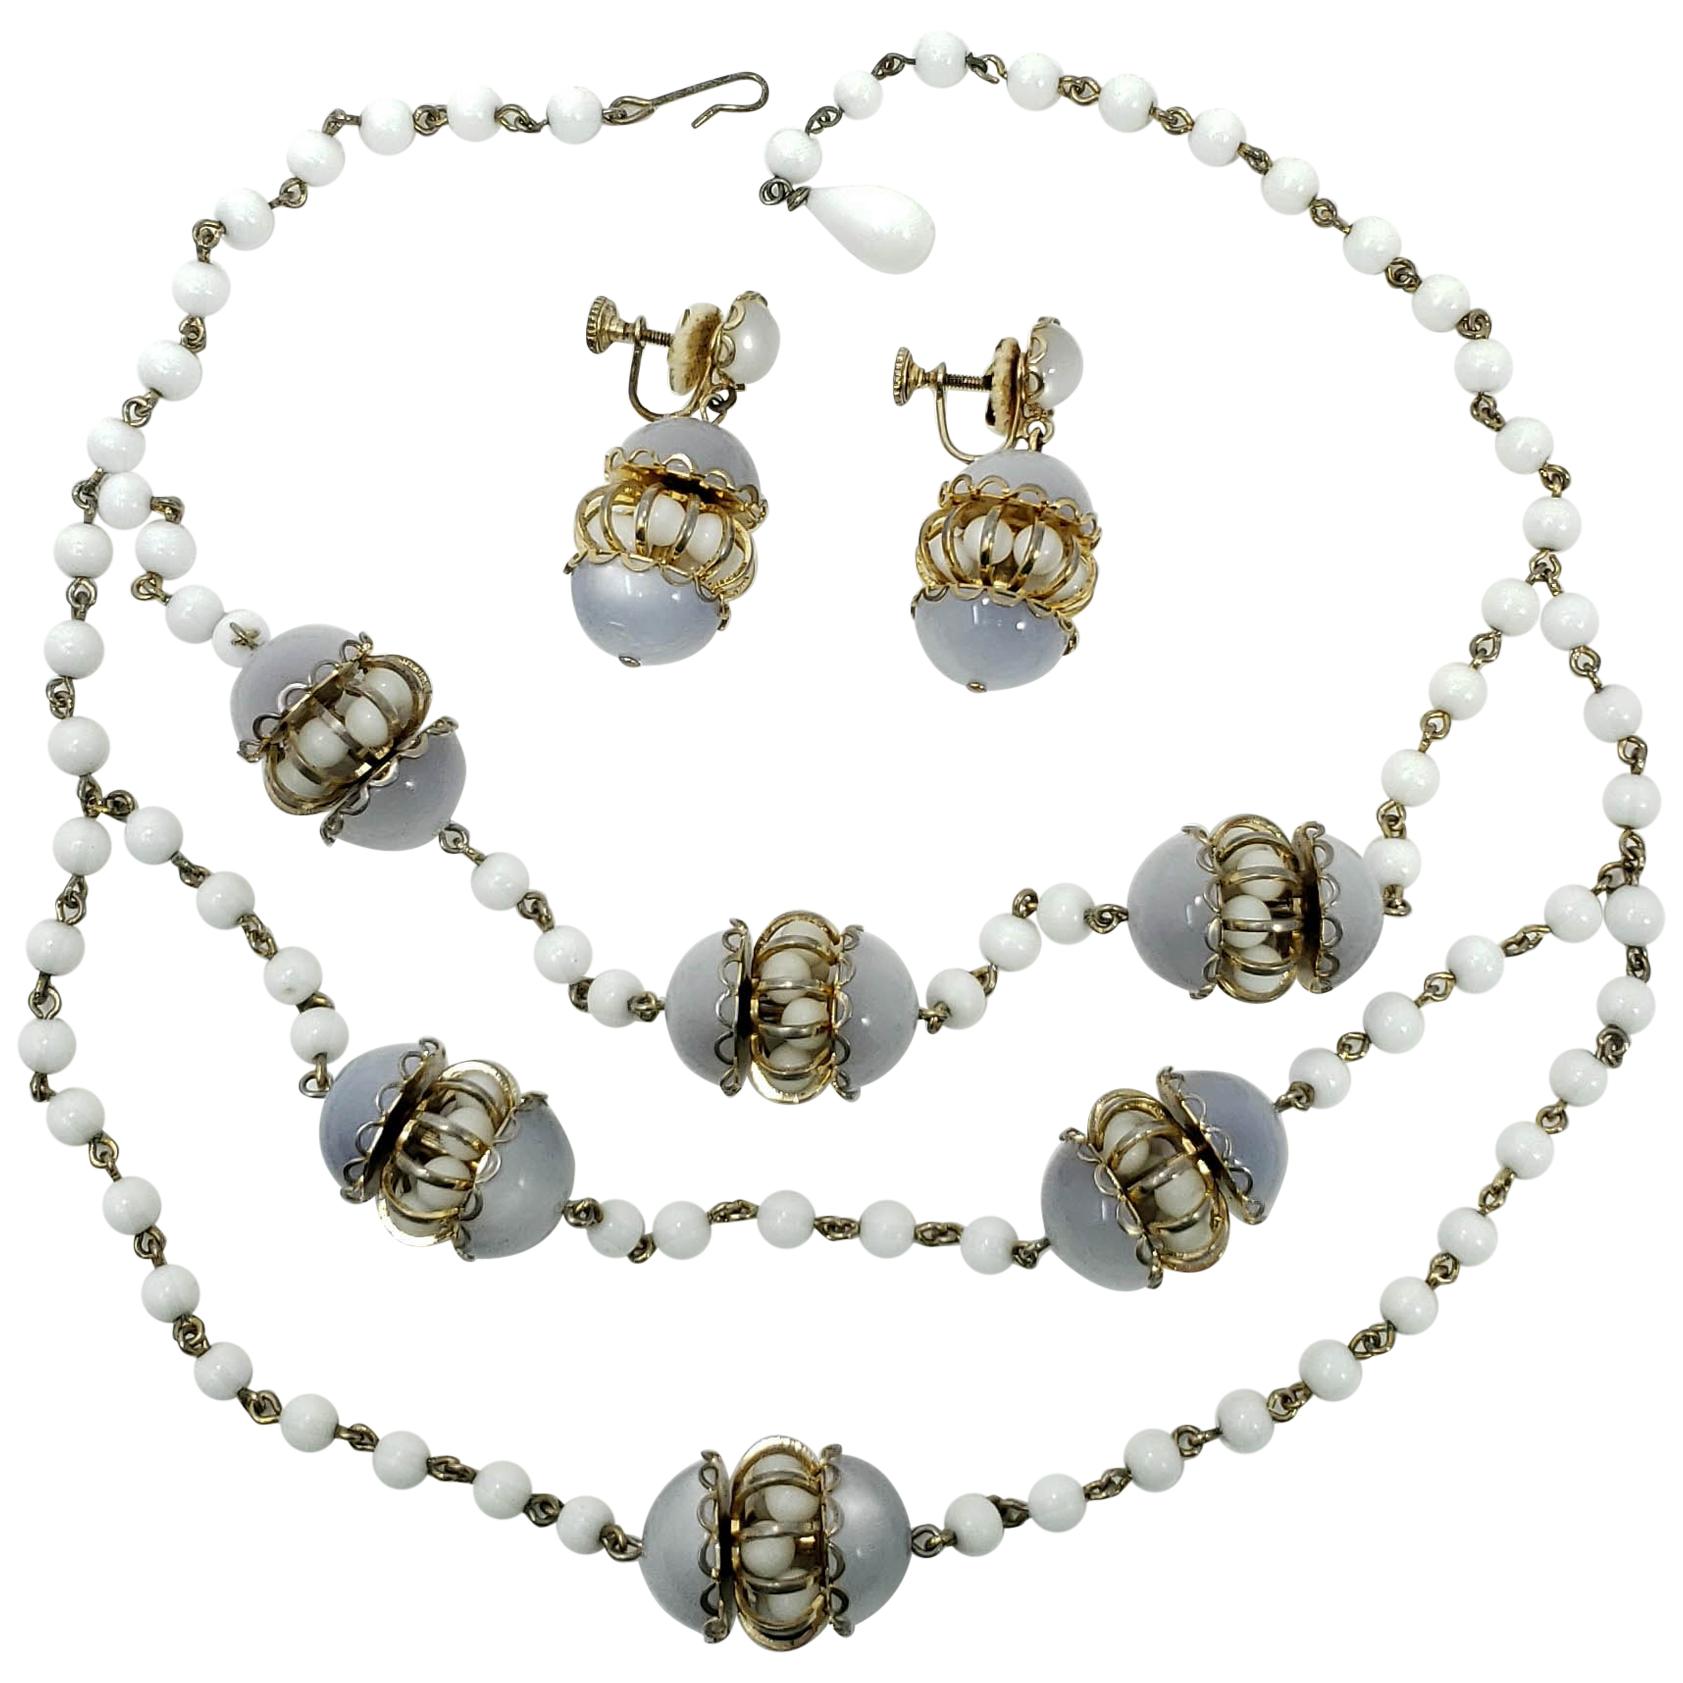 White Moonglow Lucite and Milk Glass Bead Necklace and Dangling Earrings Set For Sale